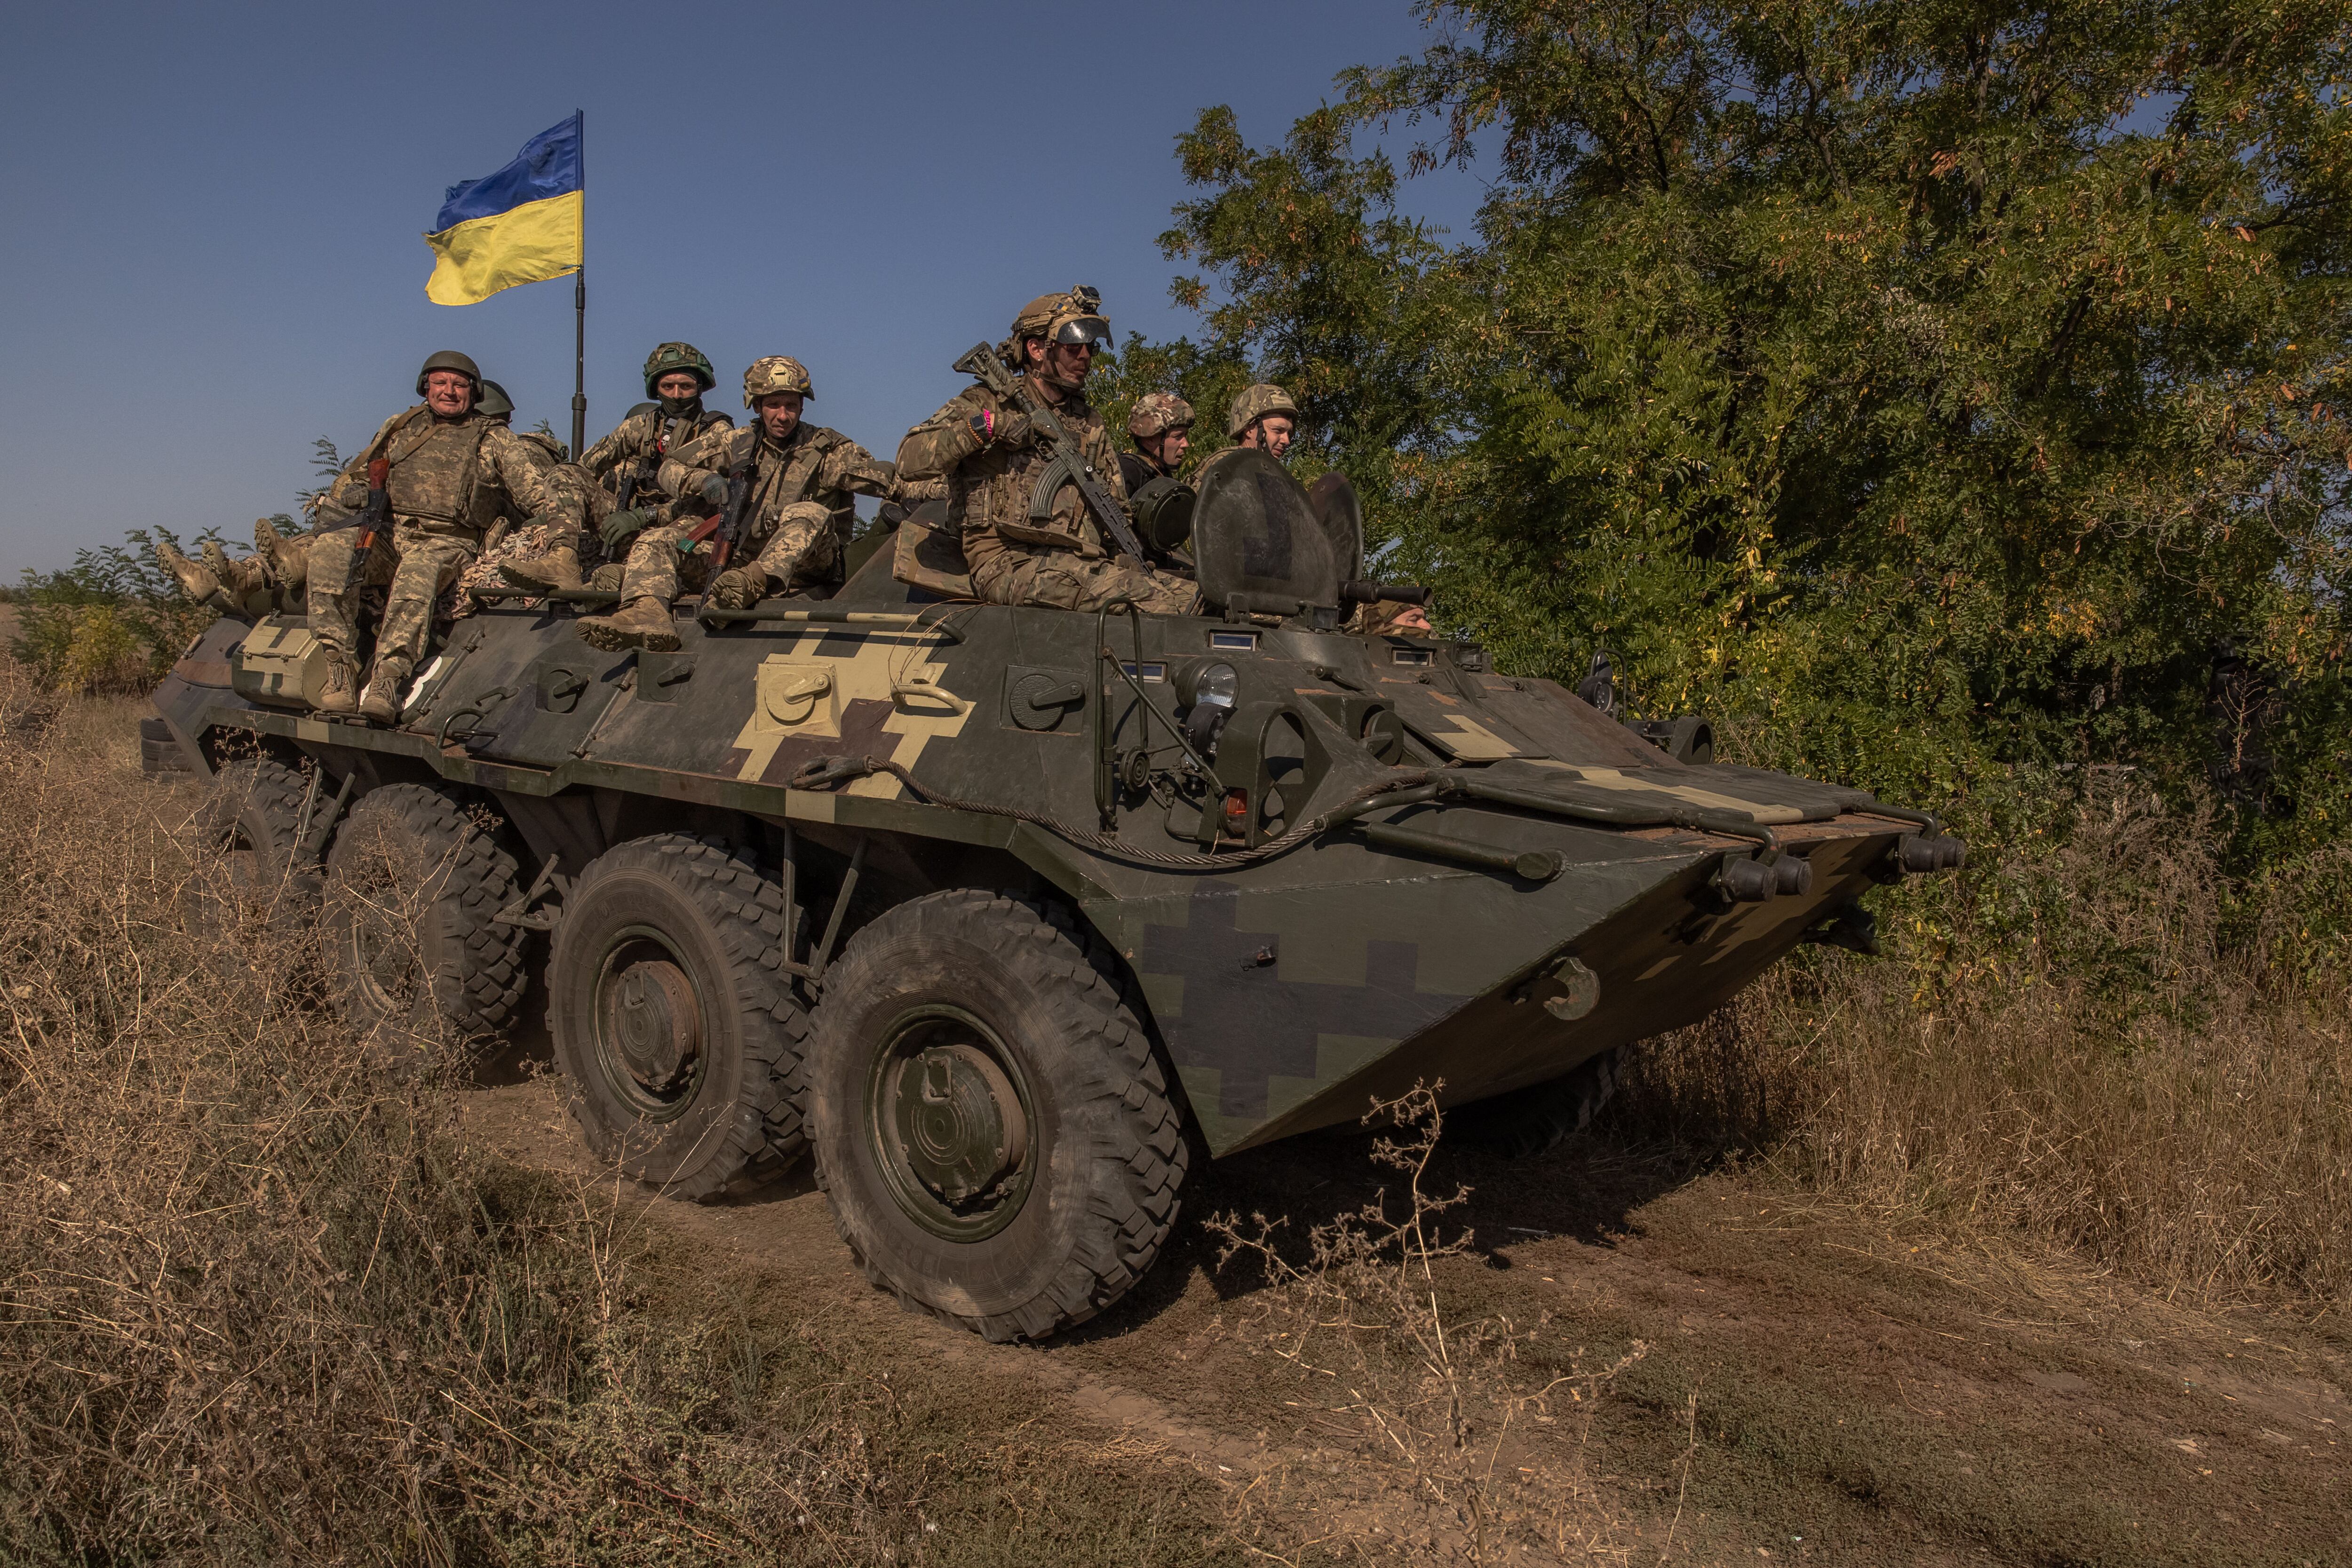 Ukrainian members of the OPFOR battalion ride atop an armored vehicle while participating in military training in the Donetsk region on September 26, 2023, amid Russia's invasion of Ukraine.  (Photo by Román PILIPEY/AFP).